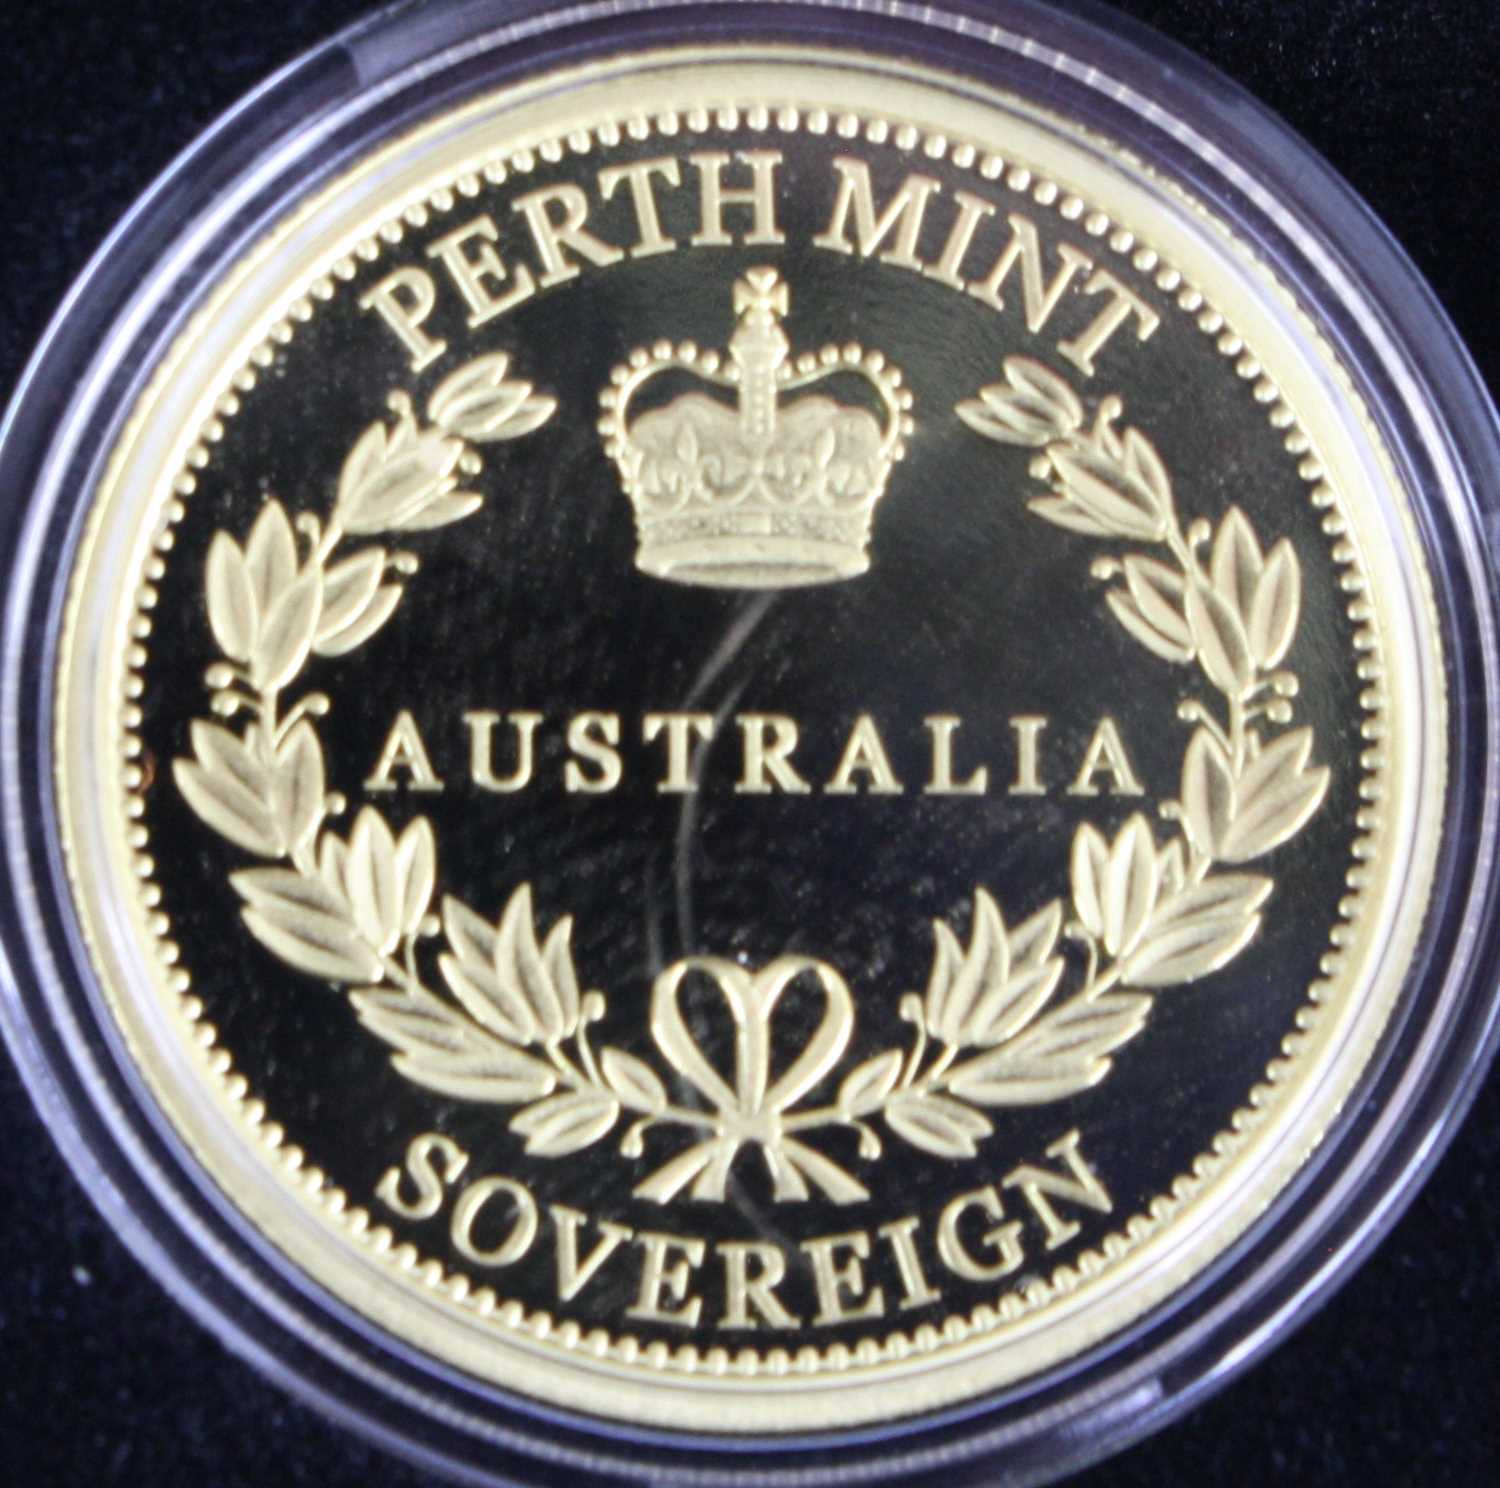 Australia, The Perth Mint, 2018 gold proof full sovereign, obv: 4th portrait of Queen Elizabeth II - Image 2 of 2